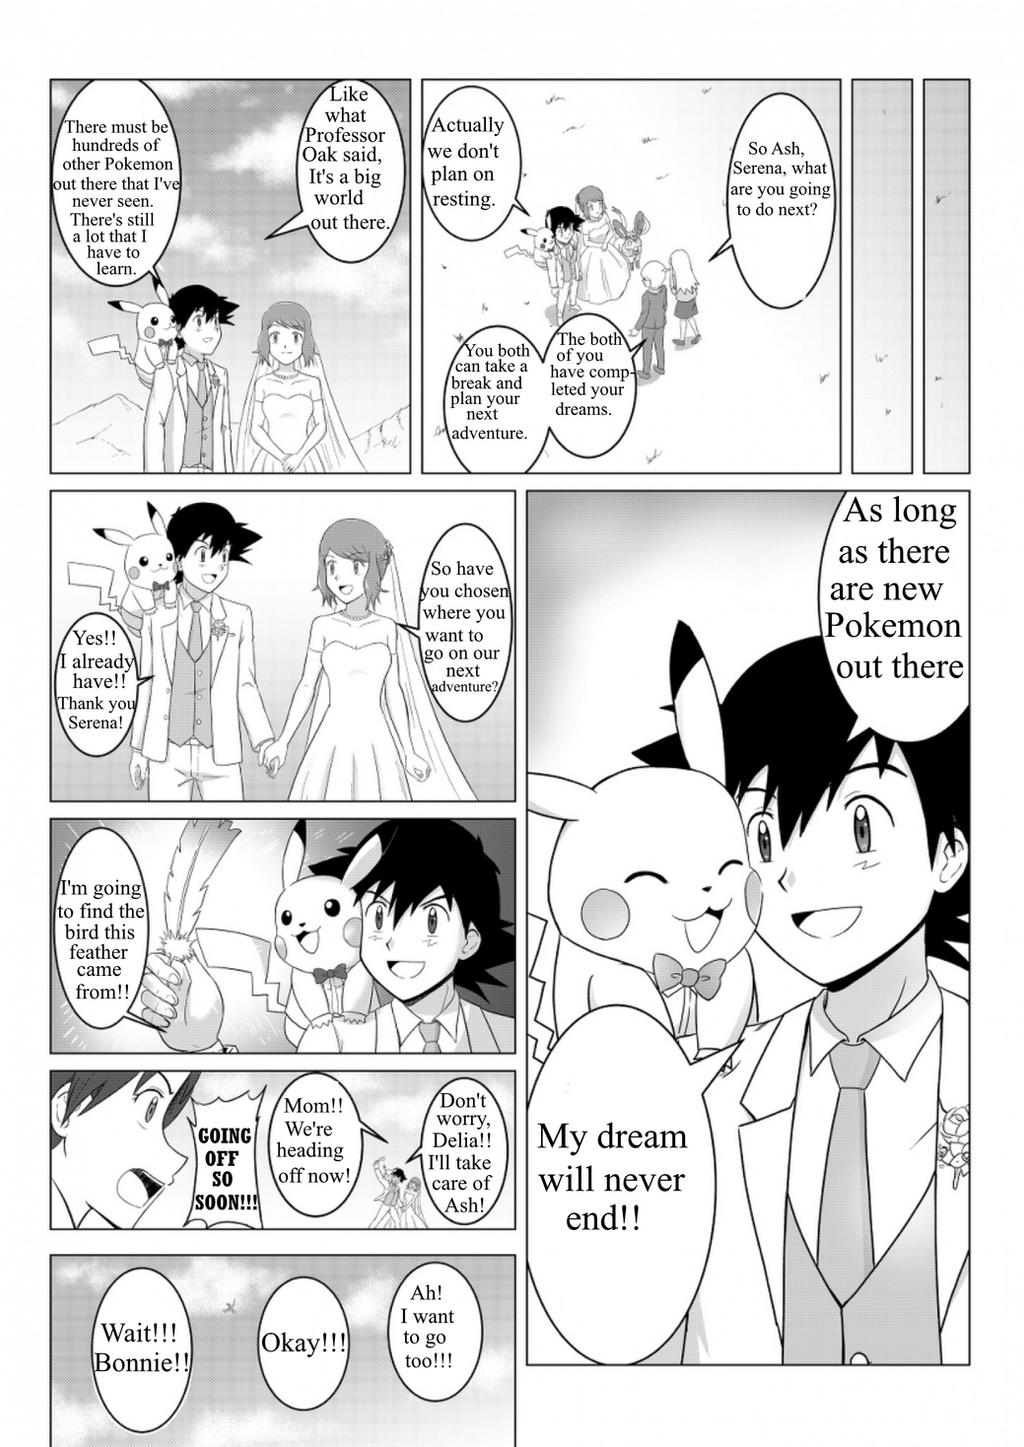 XYZ: Road to Master Part 1 P2 (A goodbye) by Quasar1007 on DeviantArt